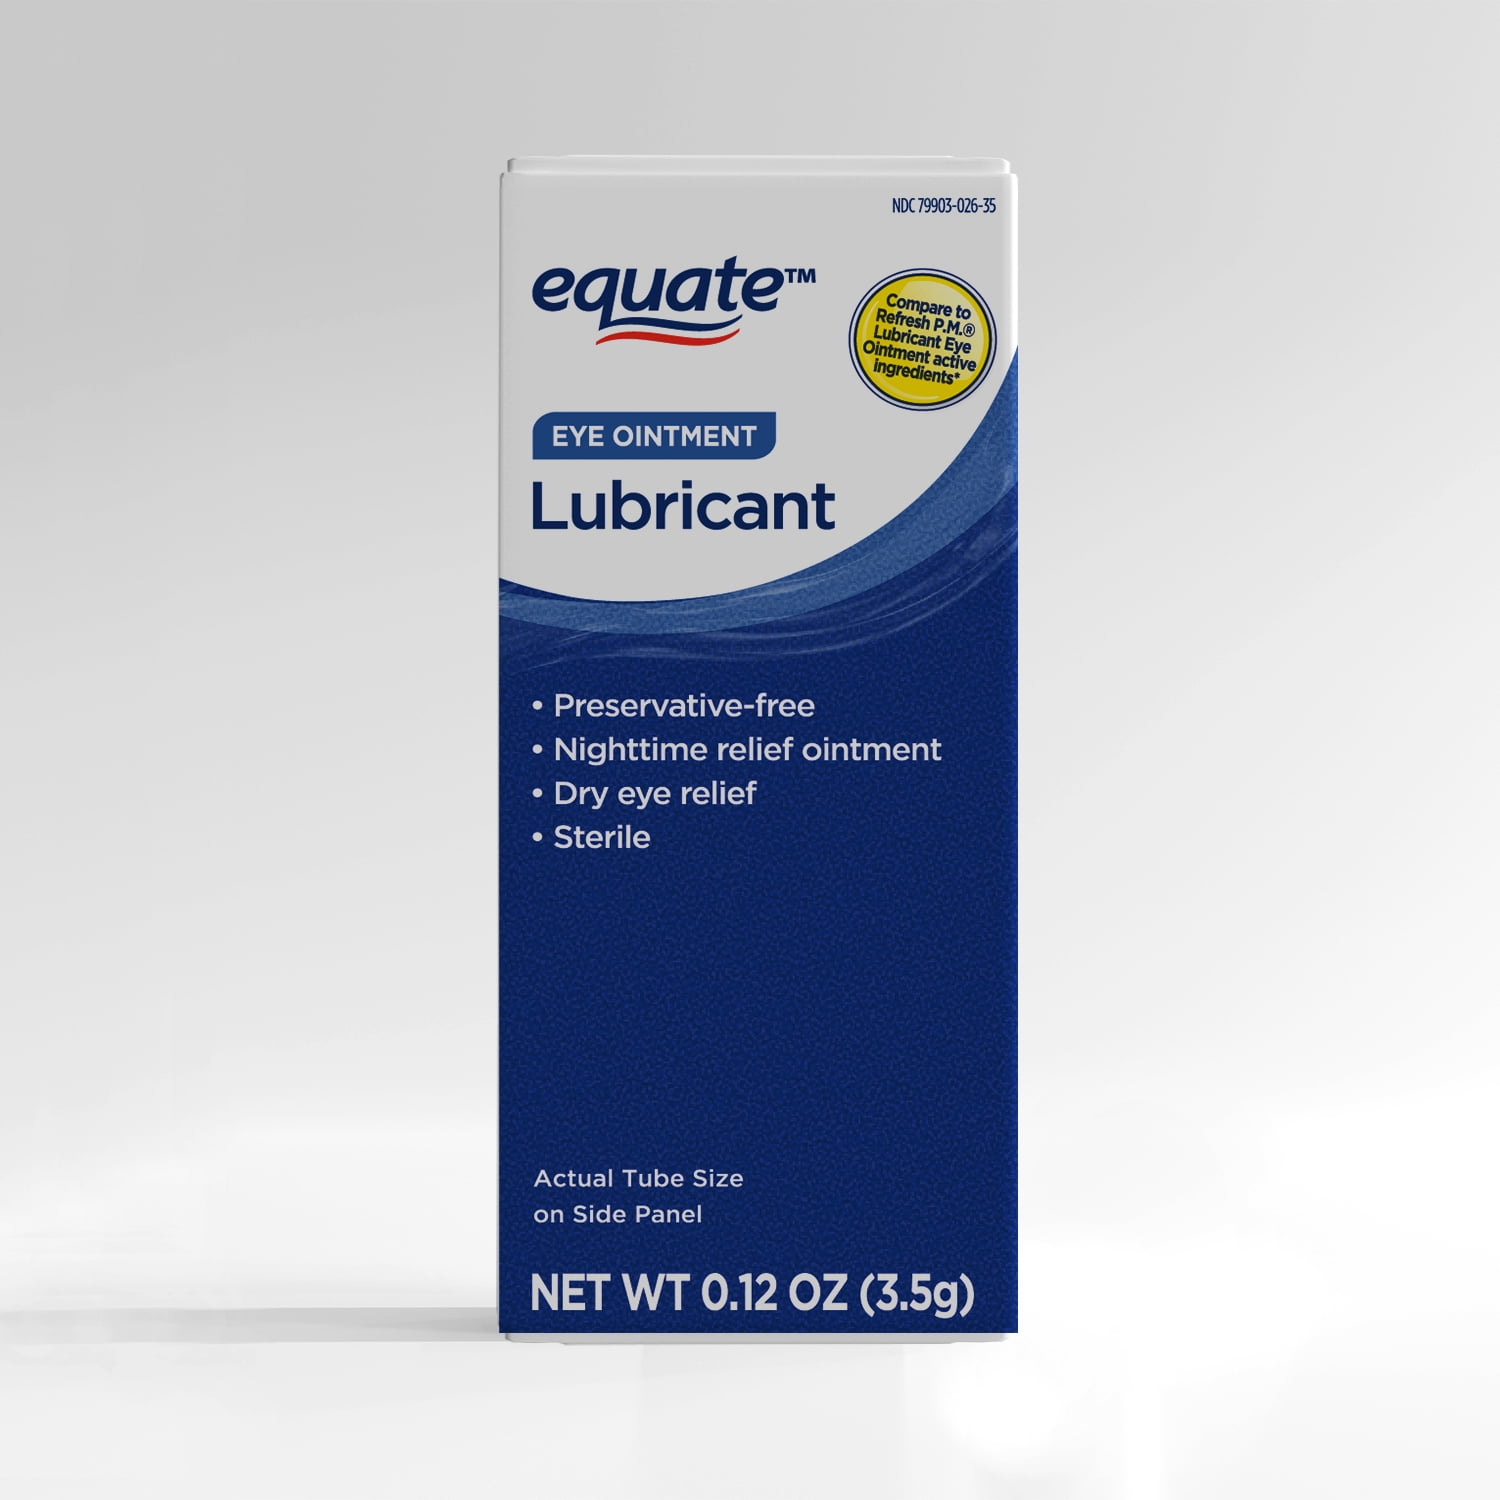 Equate Eye Ointment Lubricant